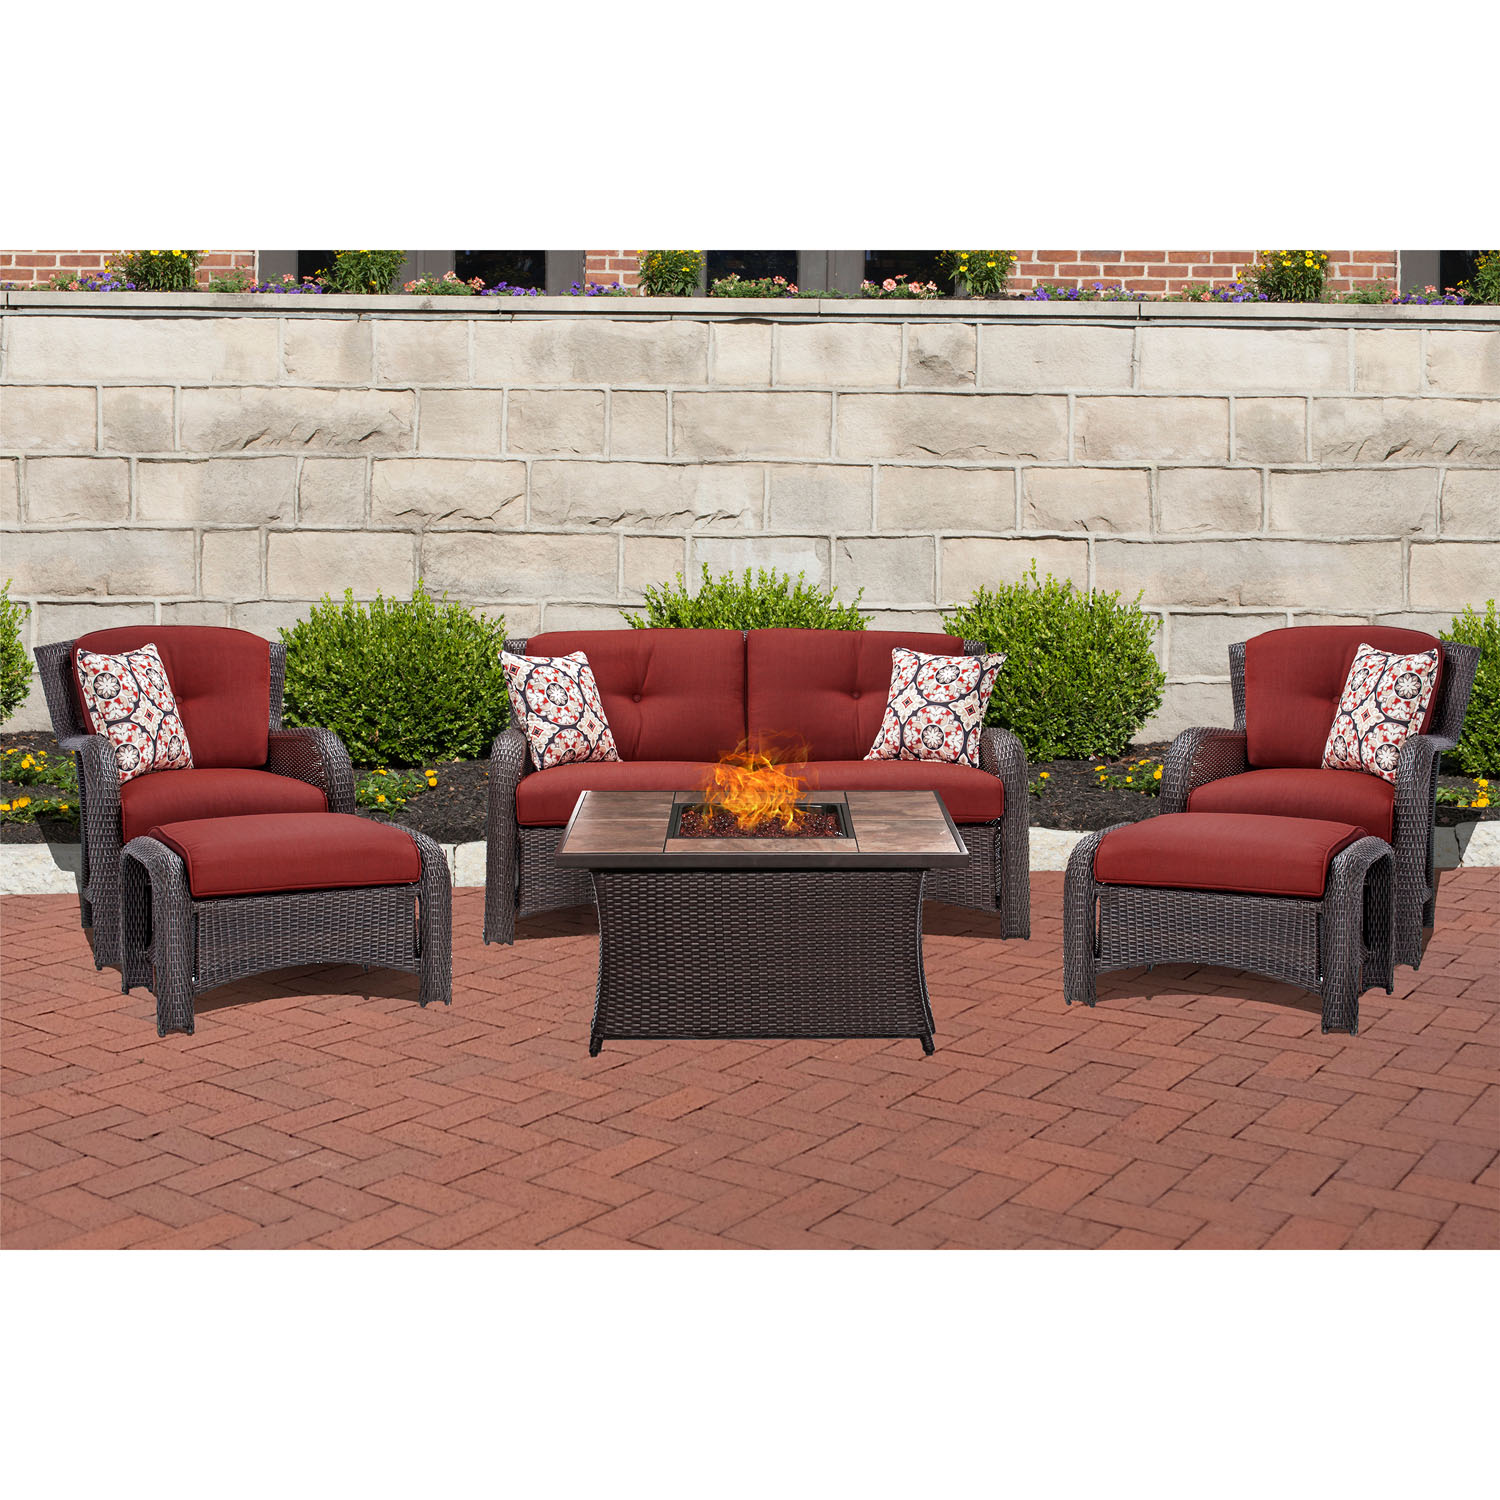 Hanover Strathmere 6 Pcs Wicker Fire Pit Chat Set, Crimson Red - image 1 of 10